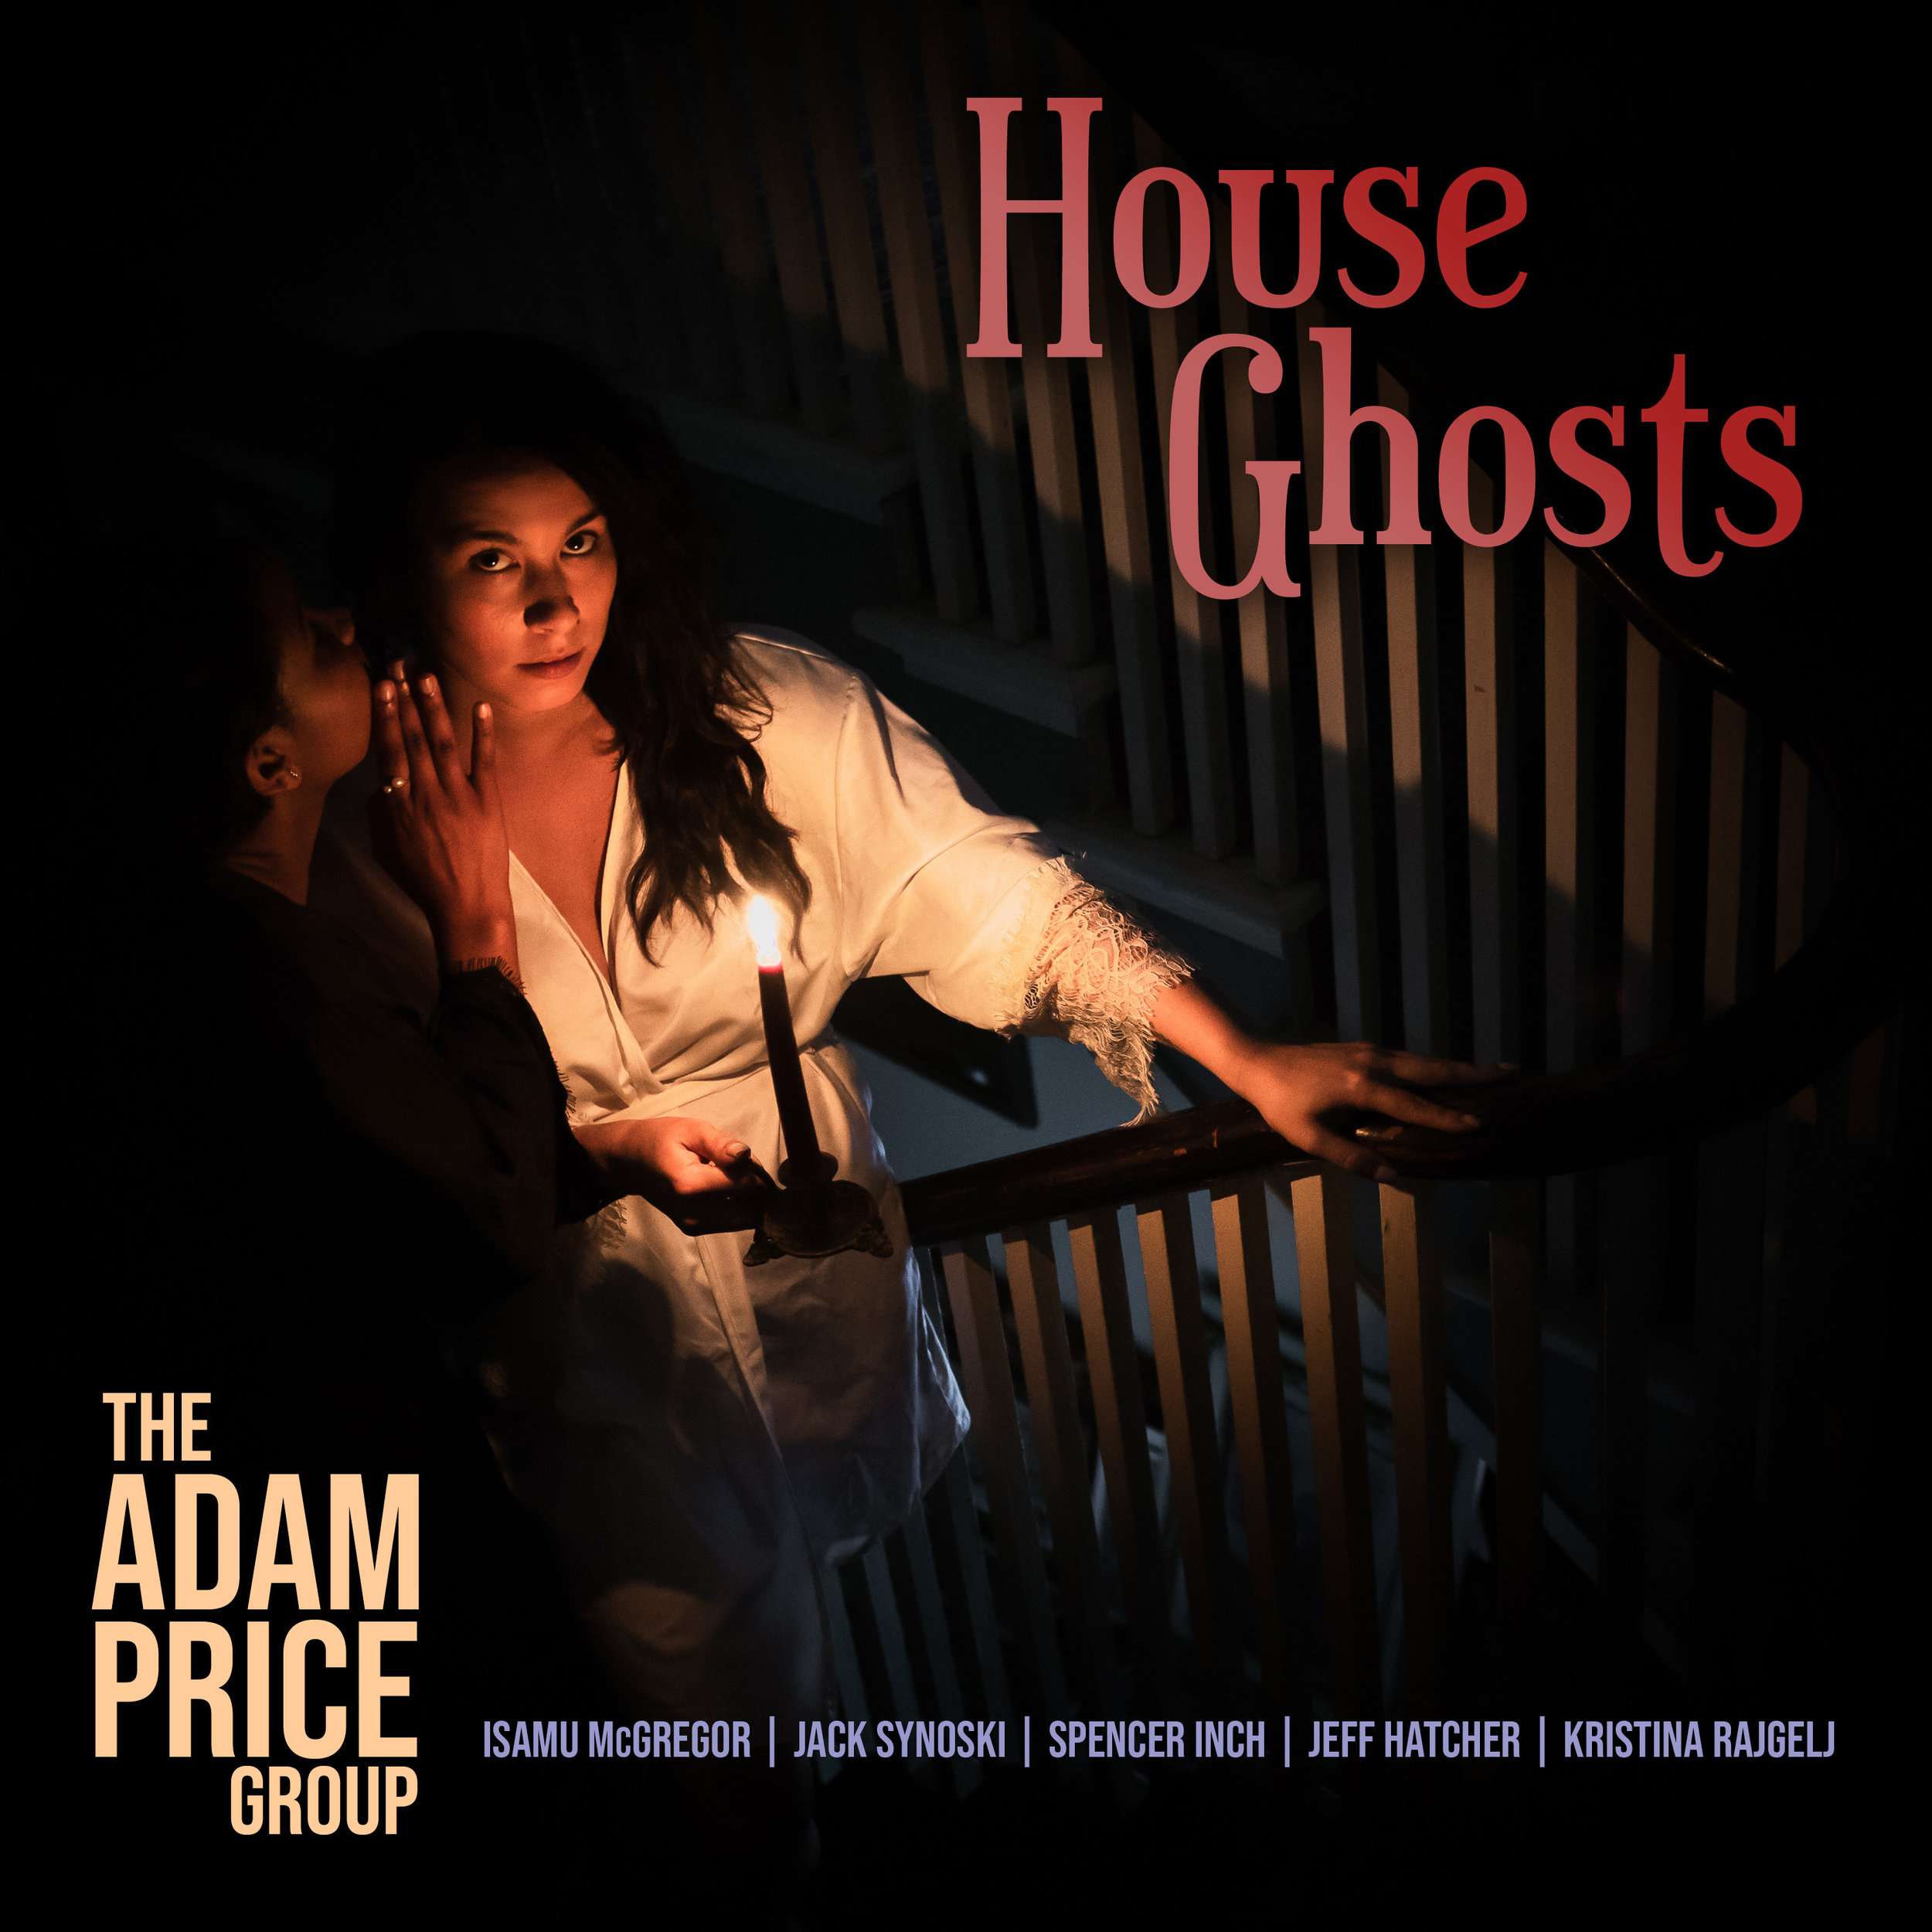 The Adam Price Group - House Ghosts